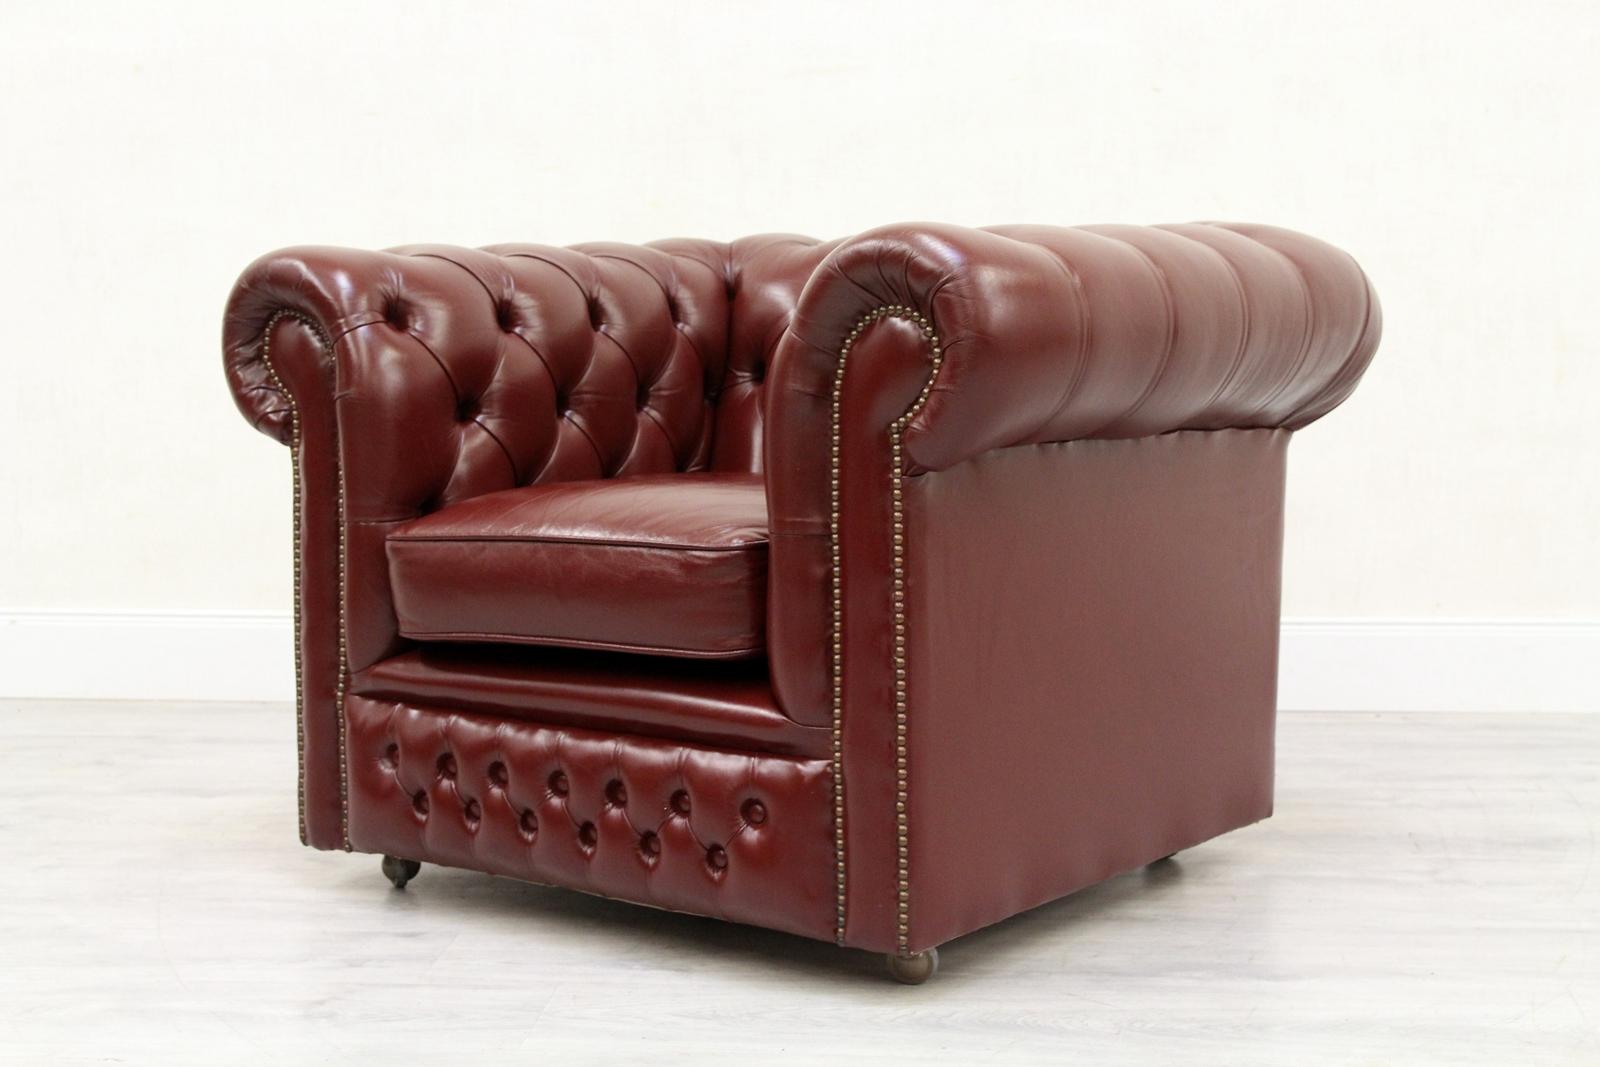 Late 20th Century Chesterfield Leather Armchair Antique Vintage English Armchair Oxblood For Sale